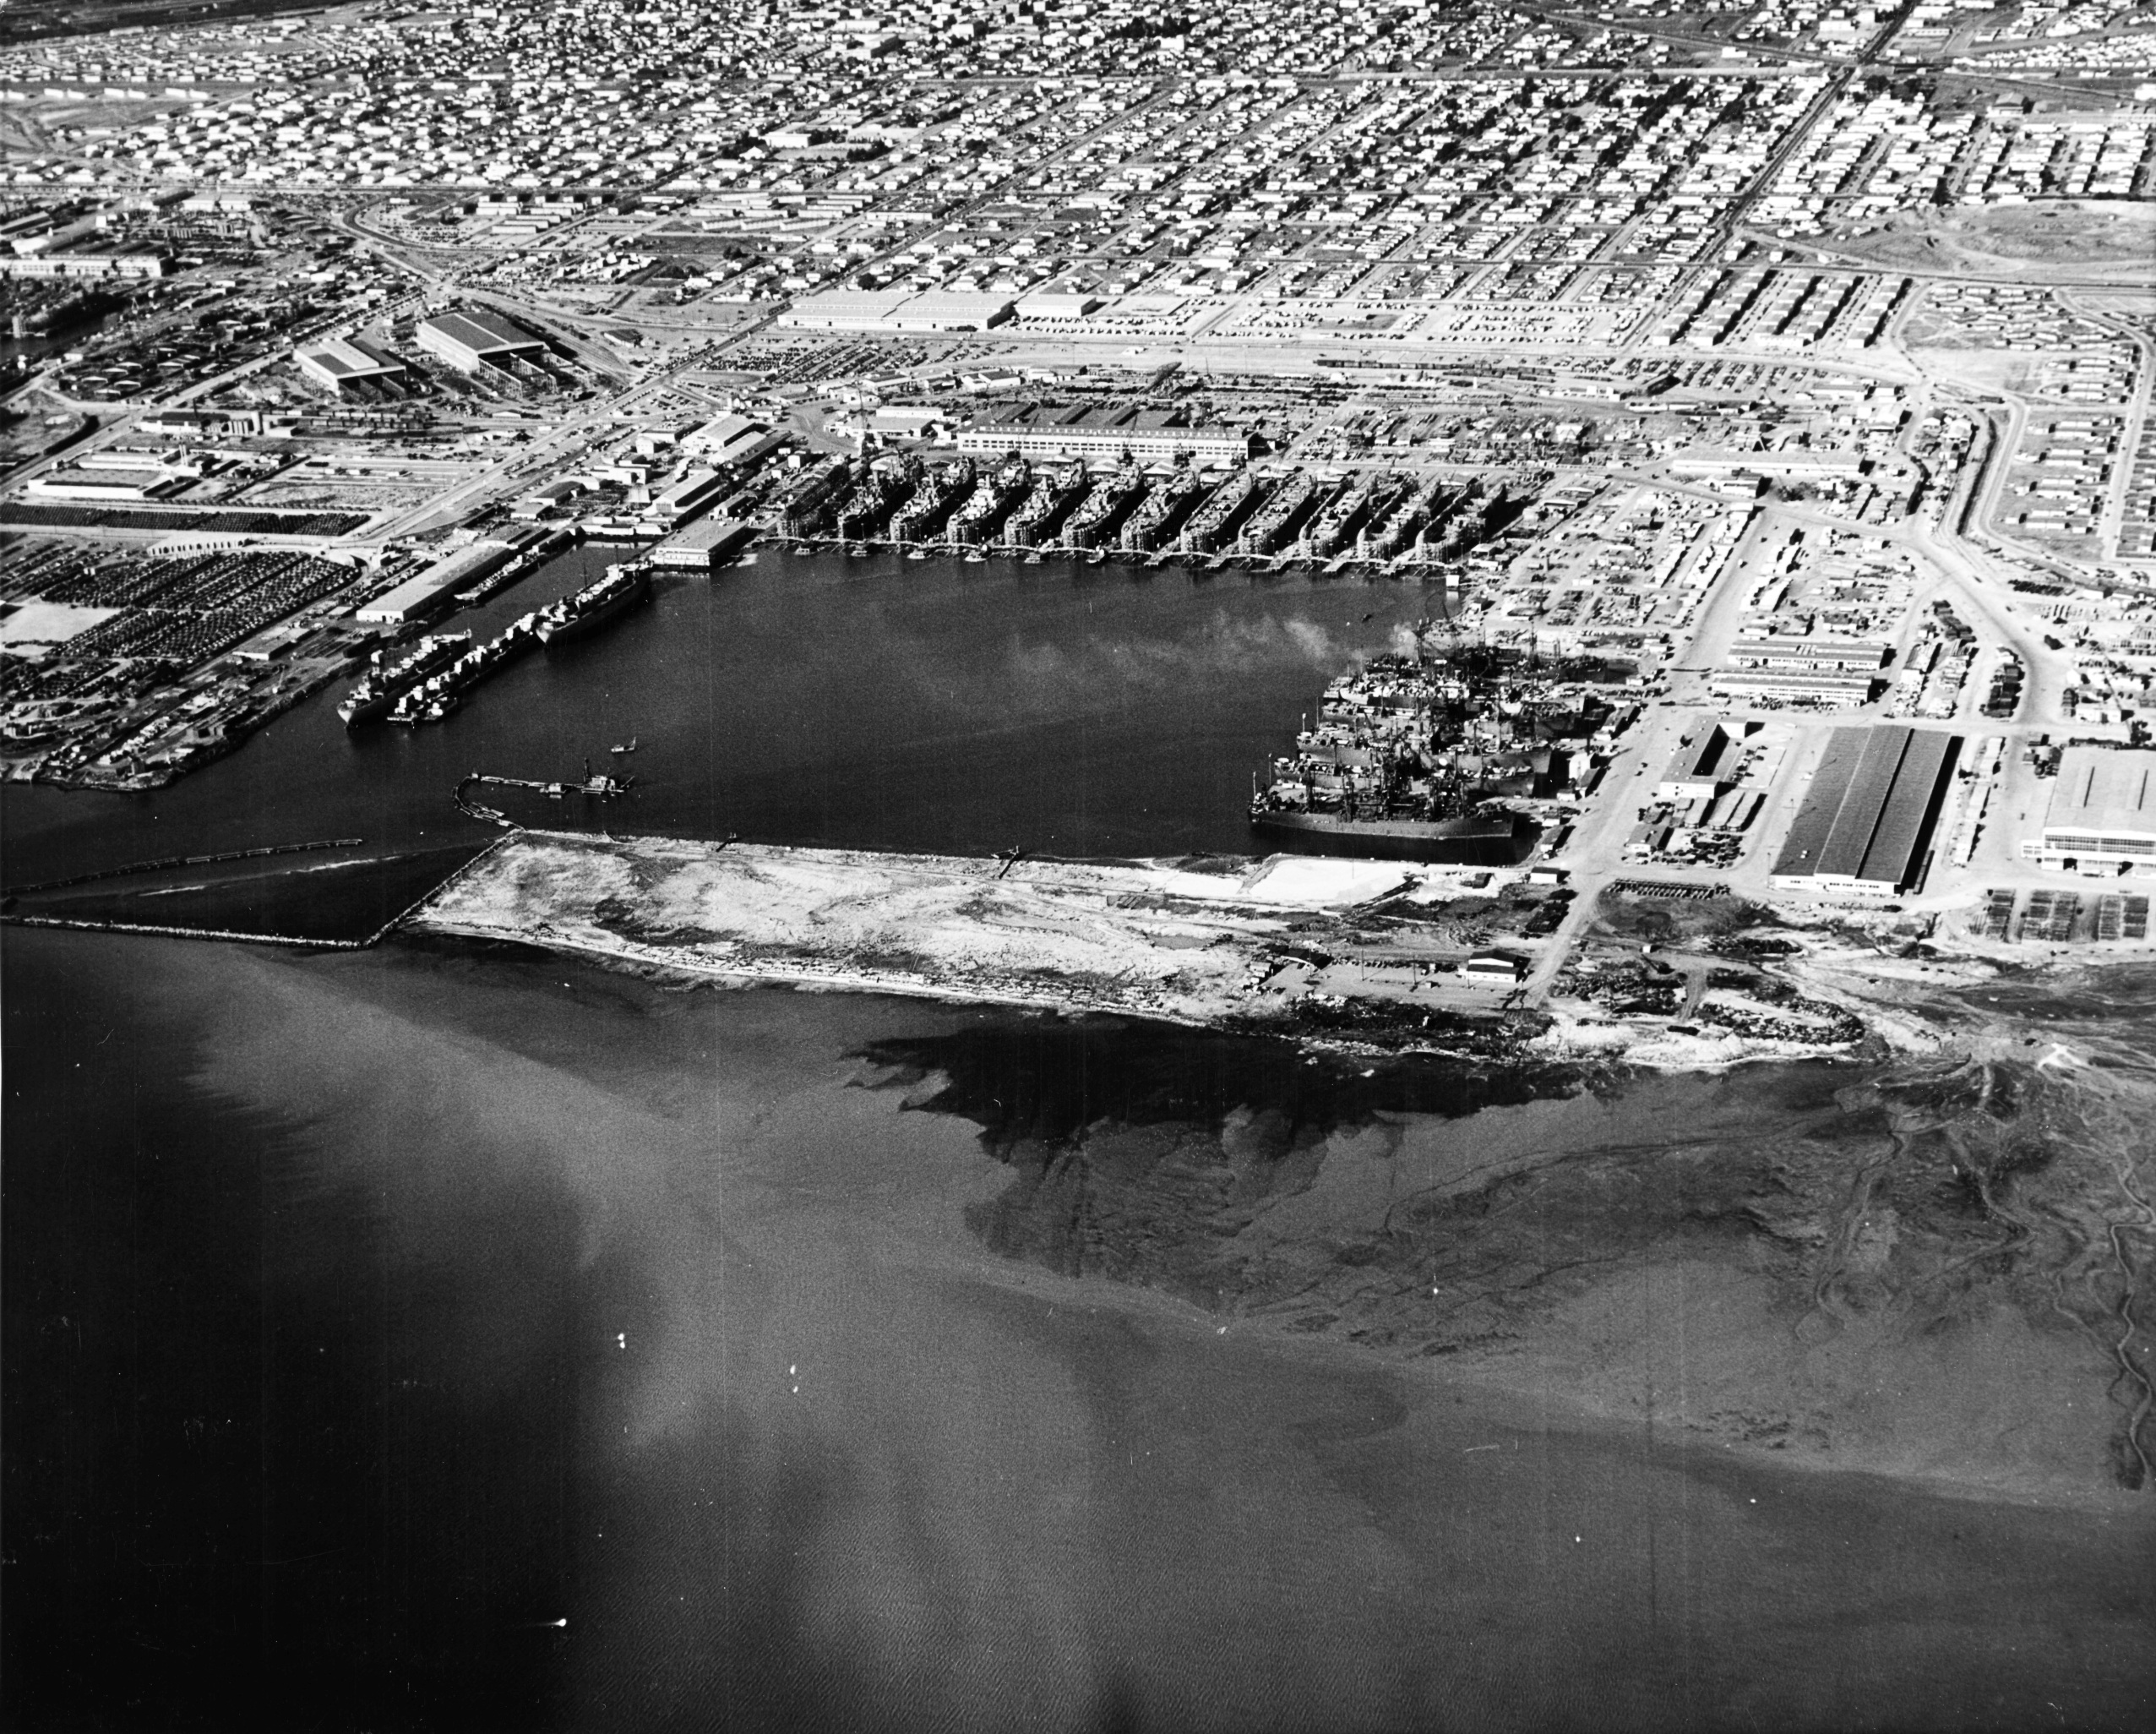 Aerial view of Permanente Metals Shipyard No. 2 looking north, Richmond, California, United States, 11 Dec 1944. Note the prefabrication sheds on the left angled 45-degrees to everything else.